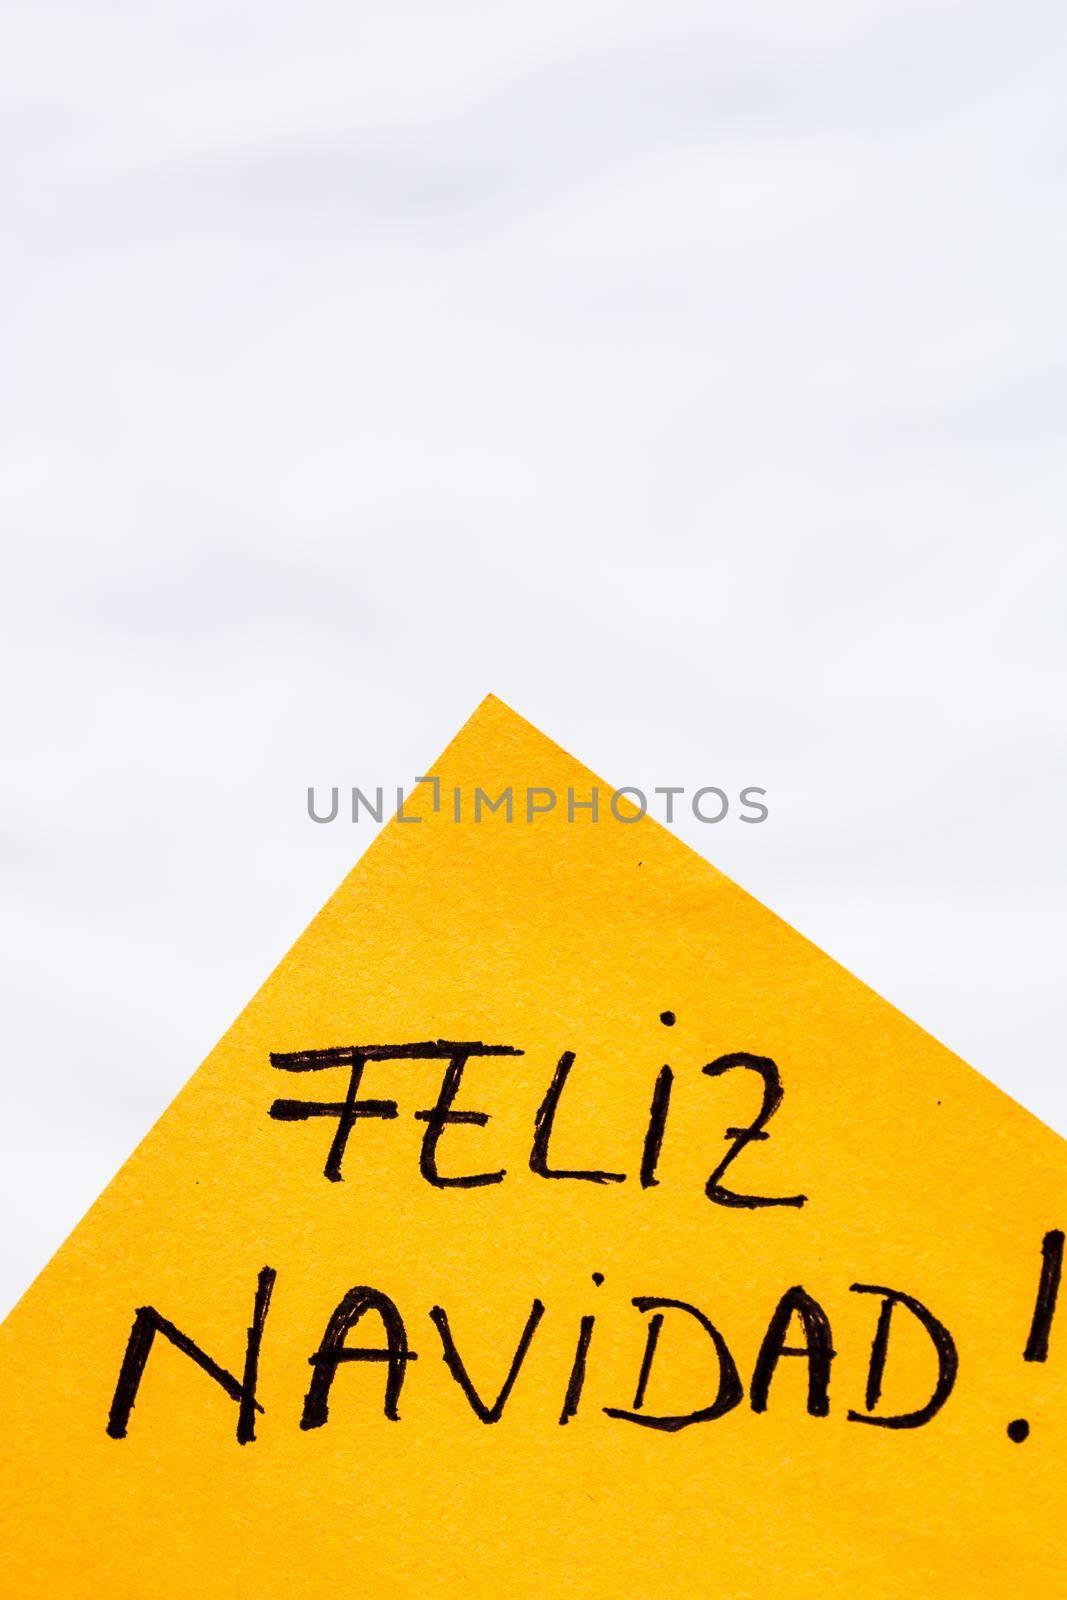 Feliz navidad (Merry Christmas) handwriting text close up isolated on orange paper with copy space. Writing text on memo post reminder.